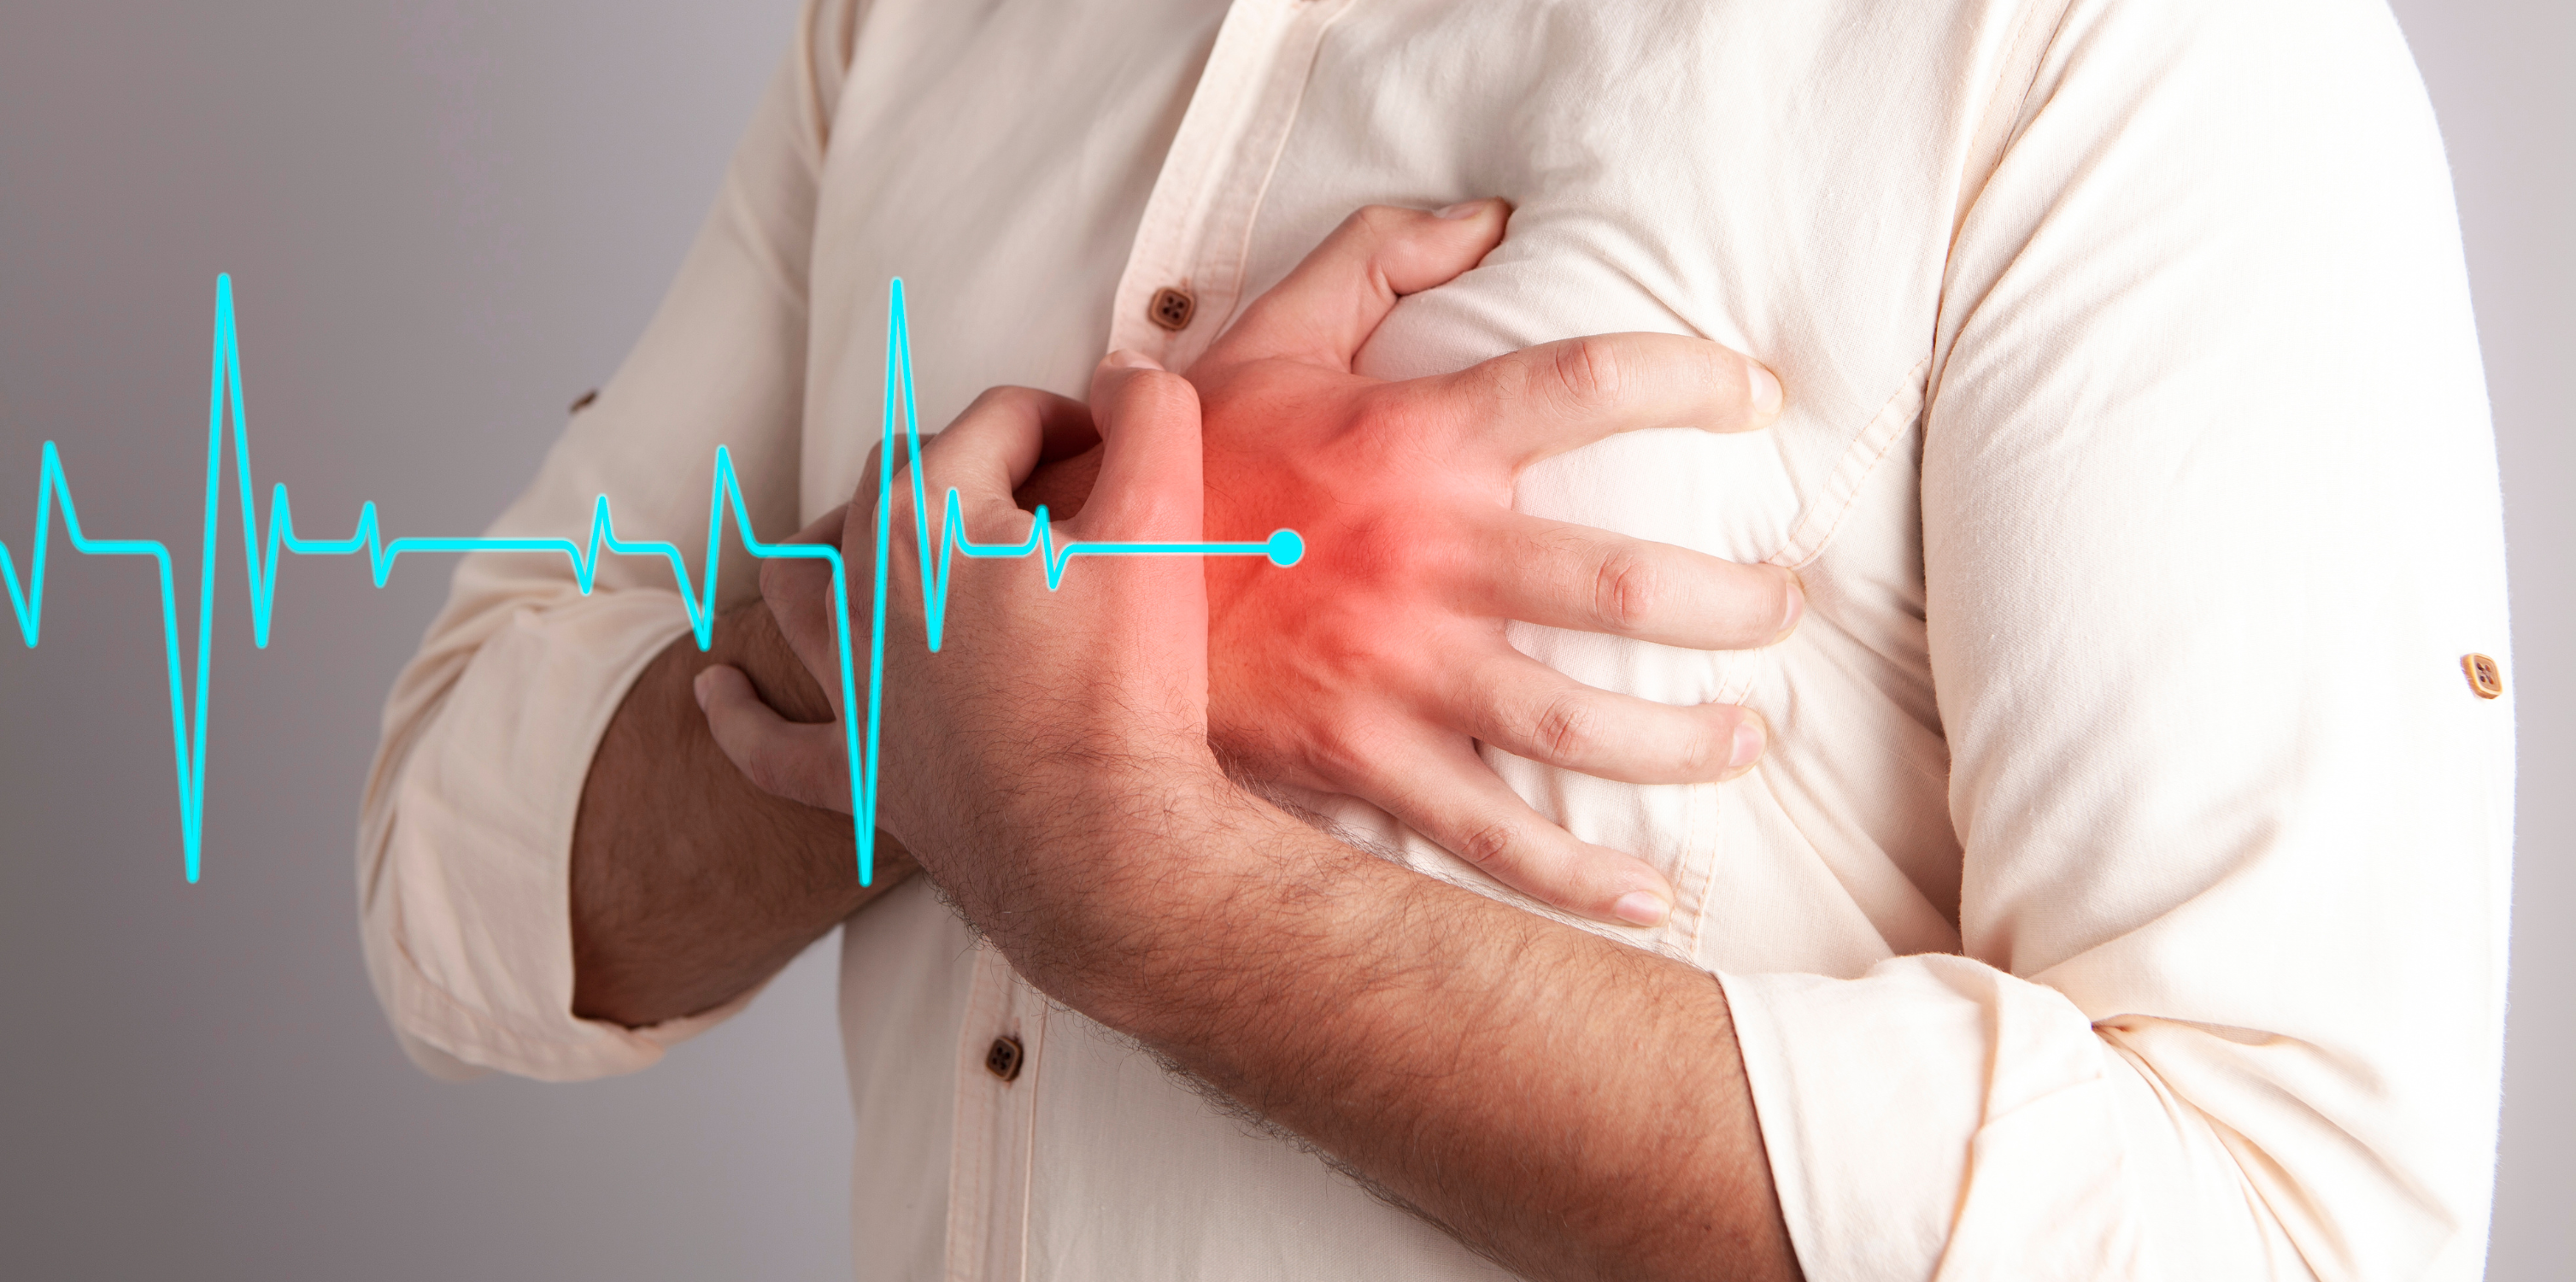 5 warning signs of a heart attack that you may not know